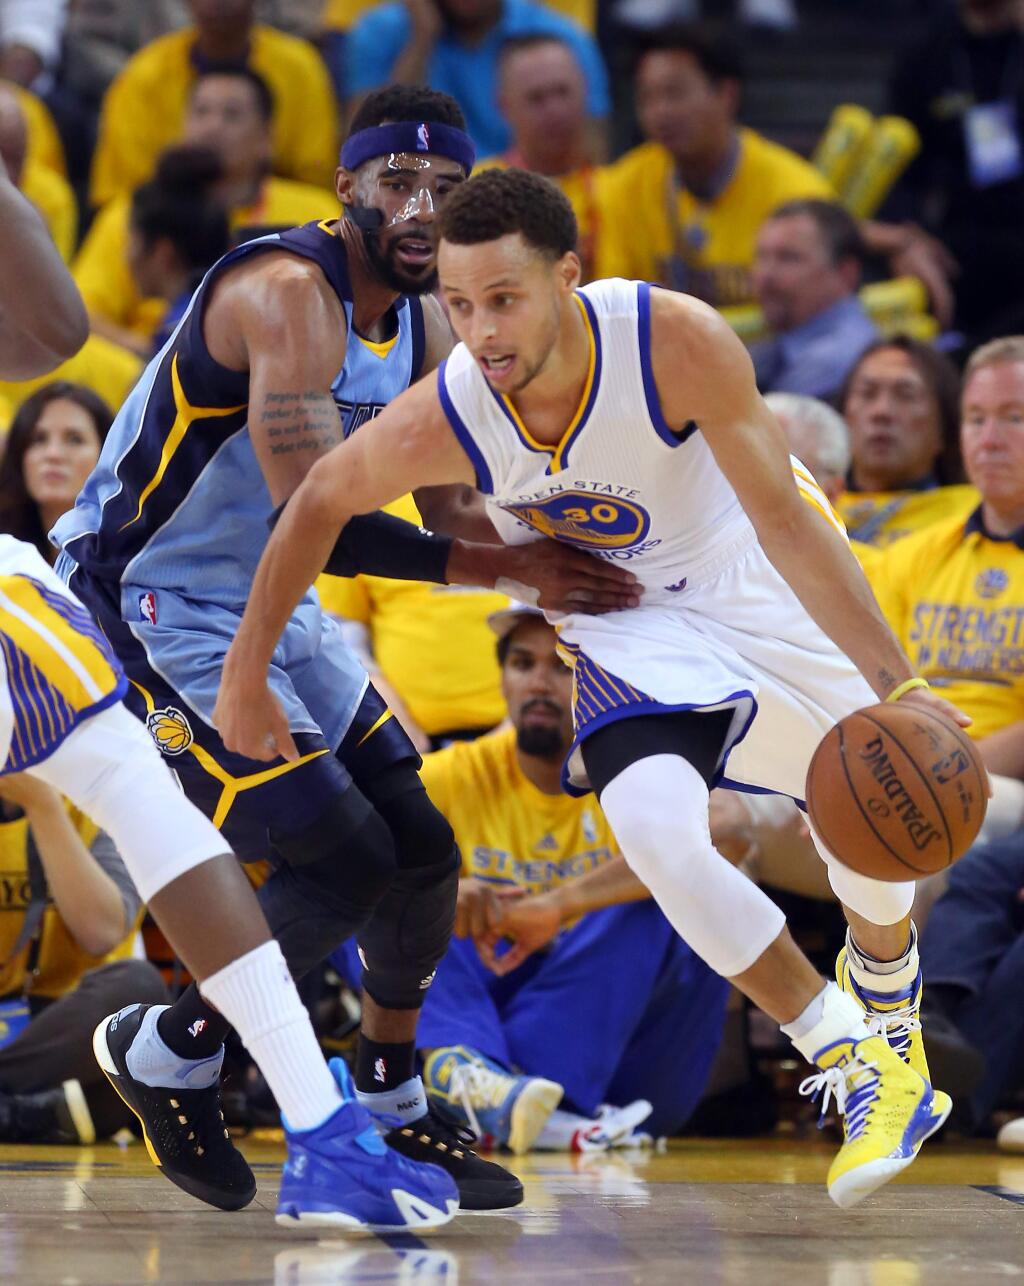 Golden State Warriors guard Stephen Curry drives around Memphis Grizzlies guard Mike Conley during Game 5 of the NBA Playoffs Western Conference Semifinals at Oracle Arena, in Oakland on Wednesday, May 13, 2015. The Warriors defeated the Grizzlies 98-78.(Christopher Chung/ The Press Democrat)